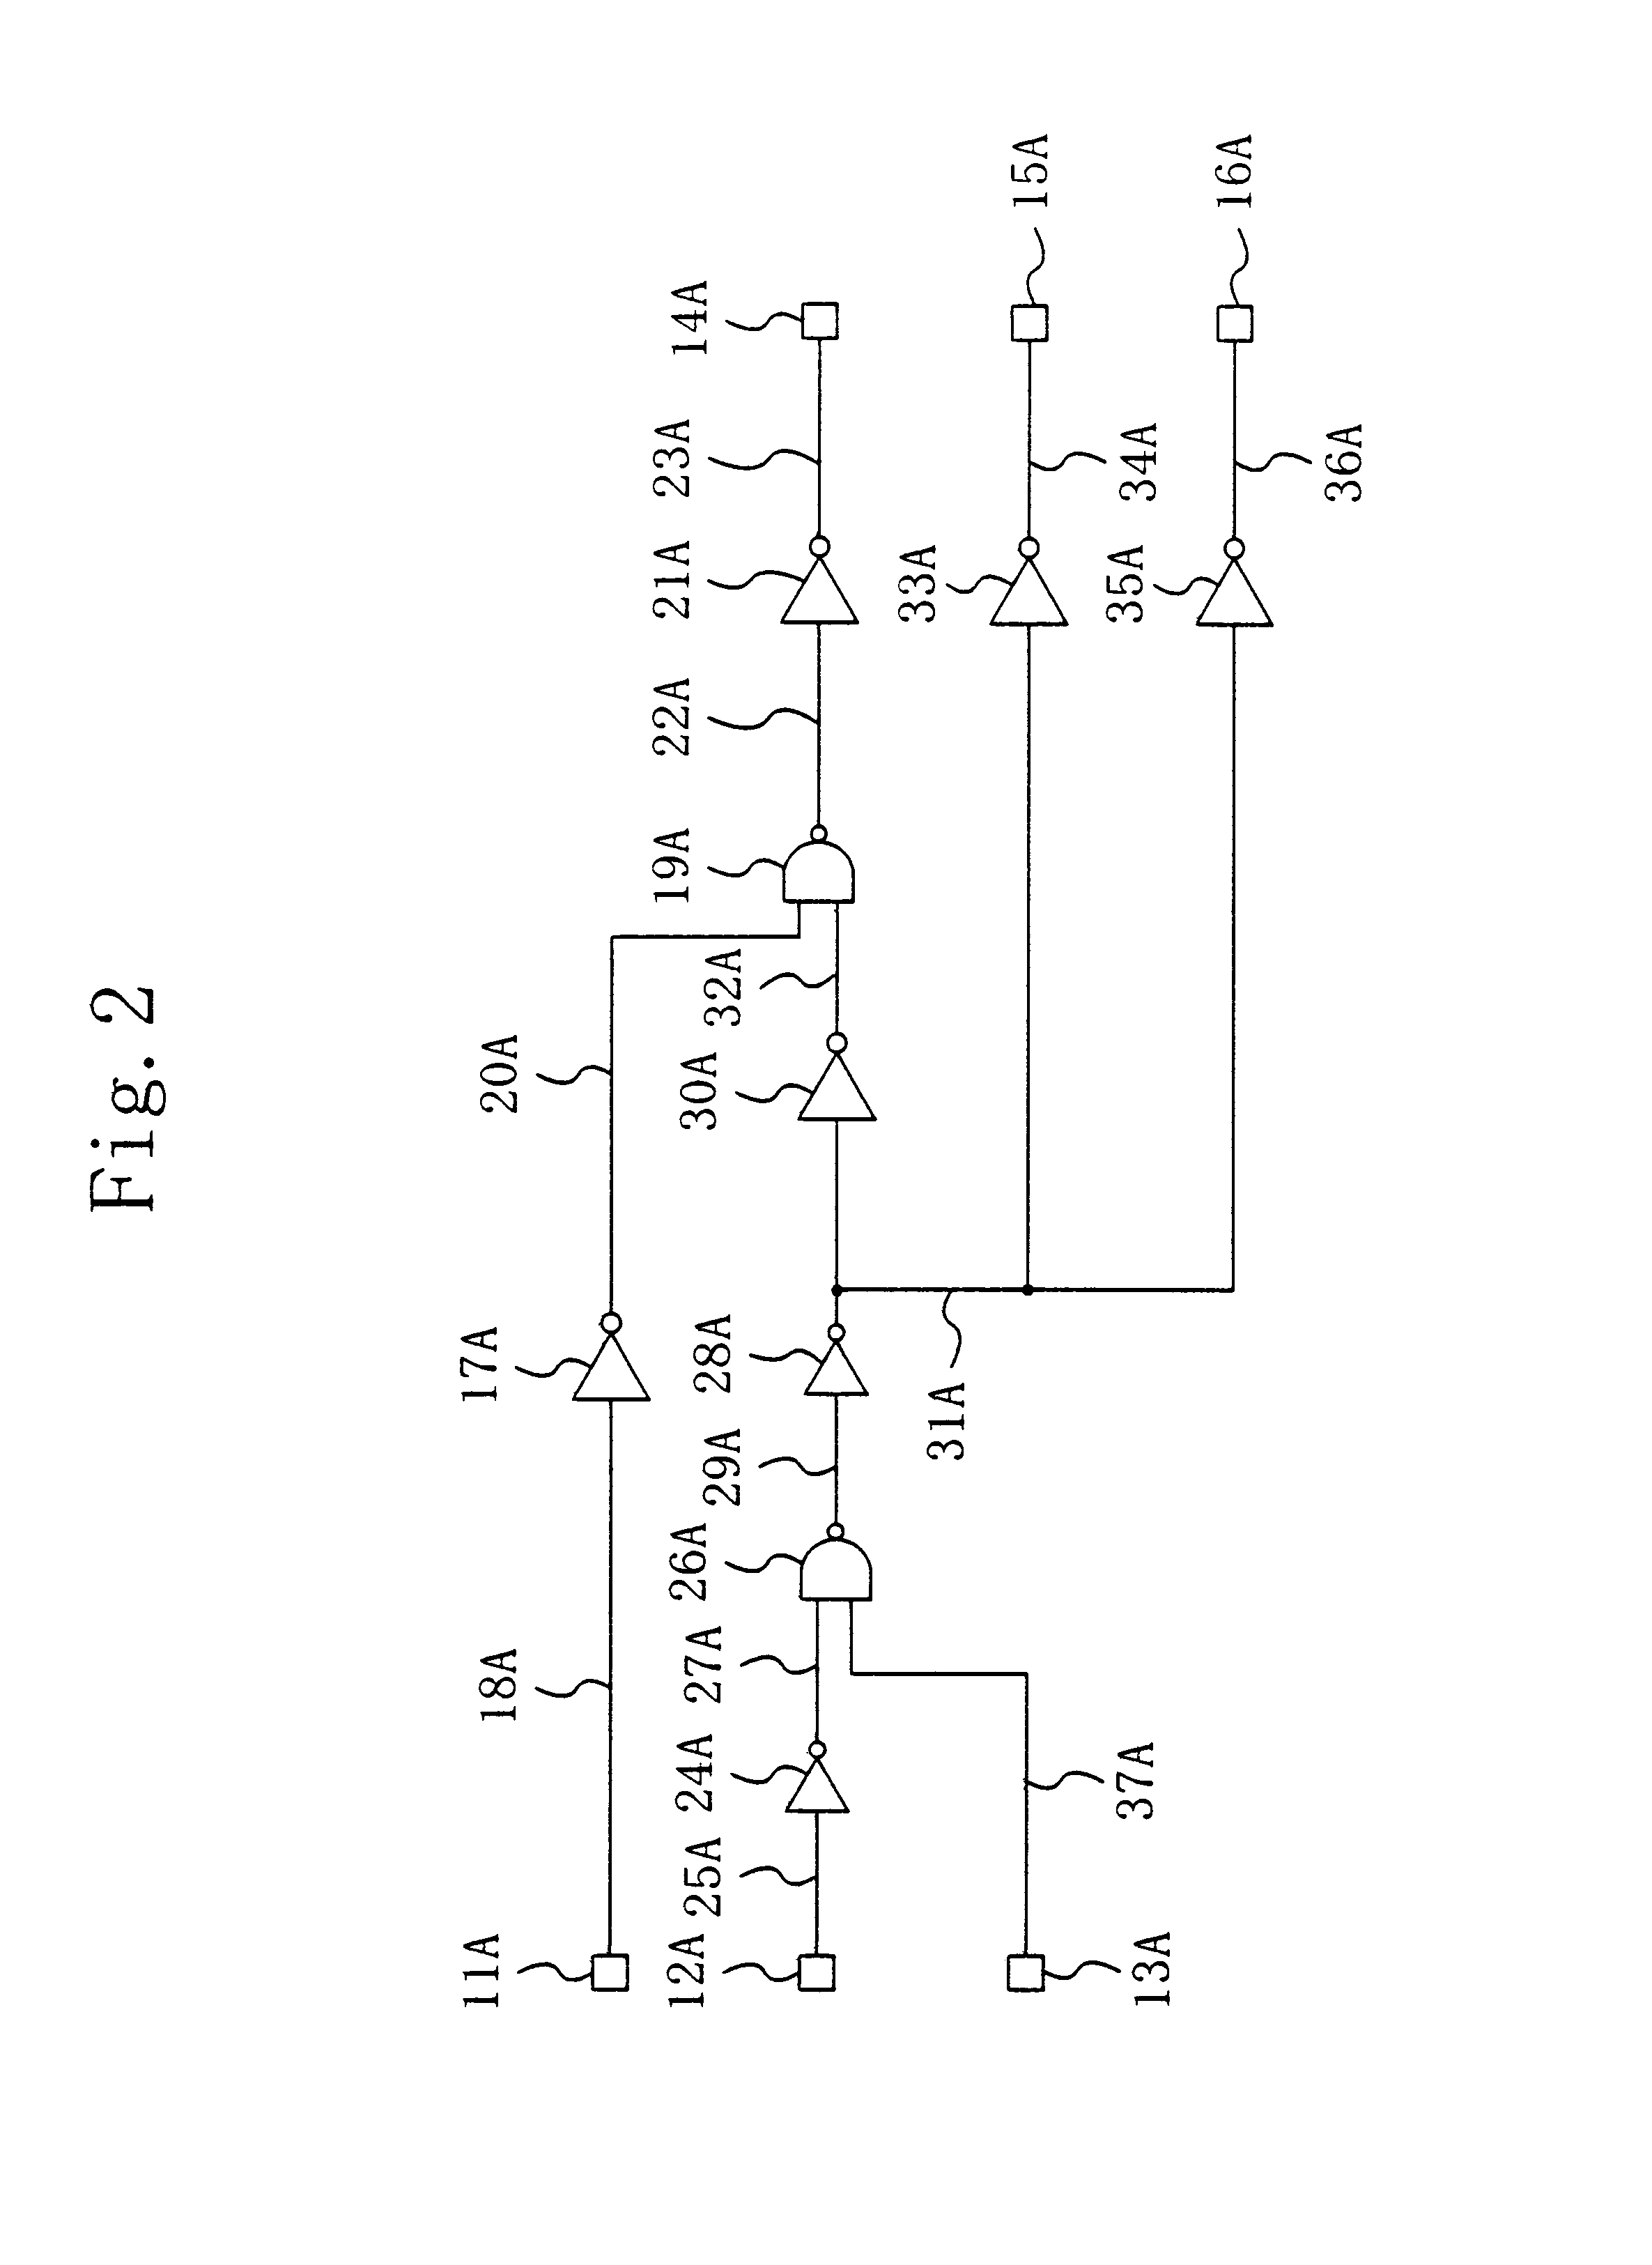 Method for designing a semiconductor integrated circuit which includes consideration of parasitic elements on critical data paths